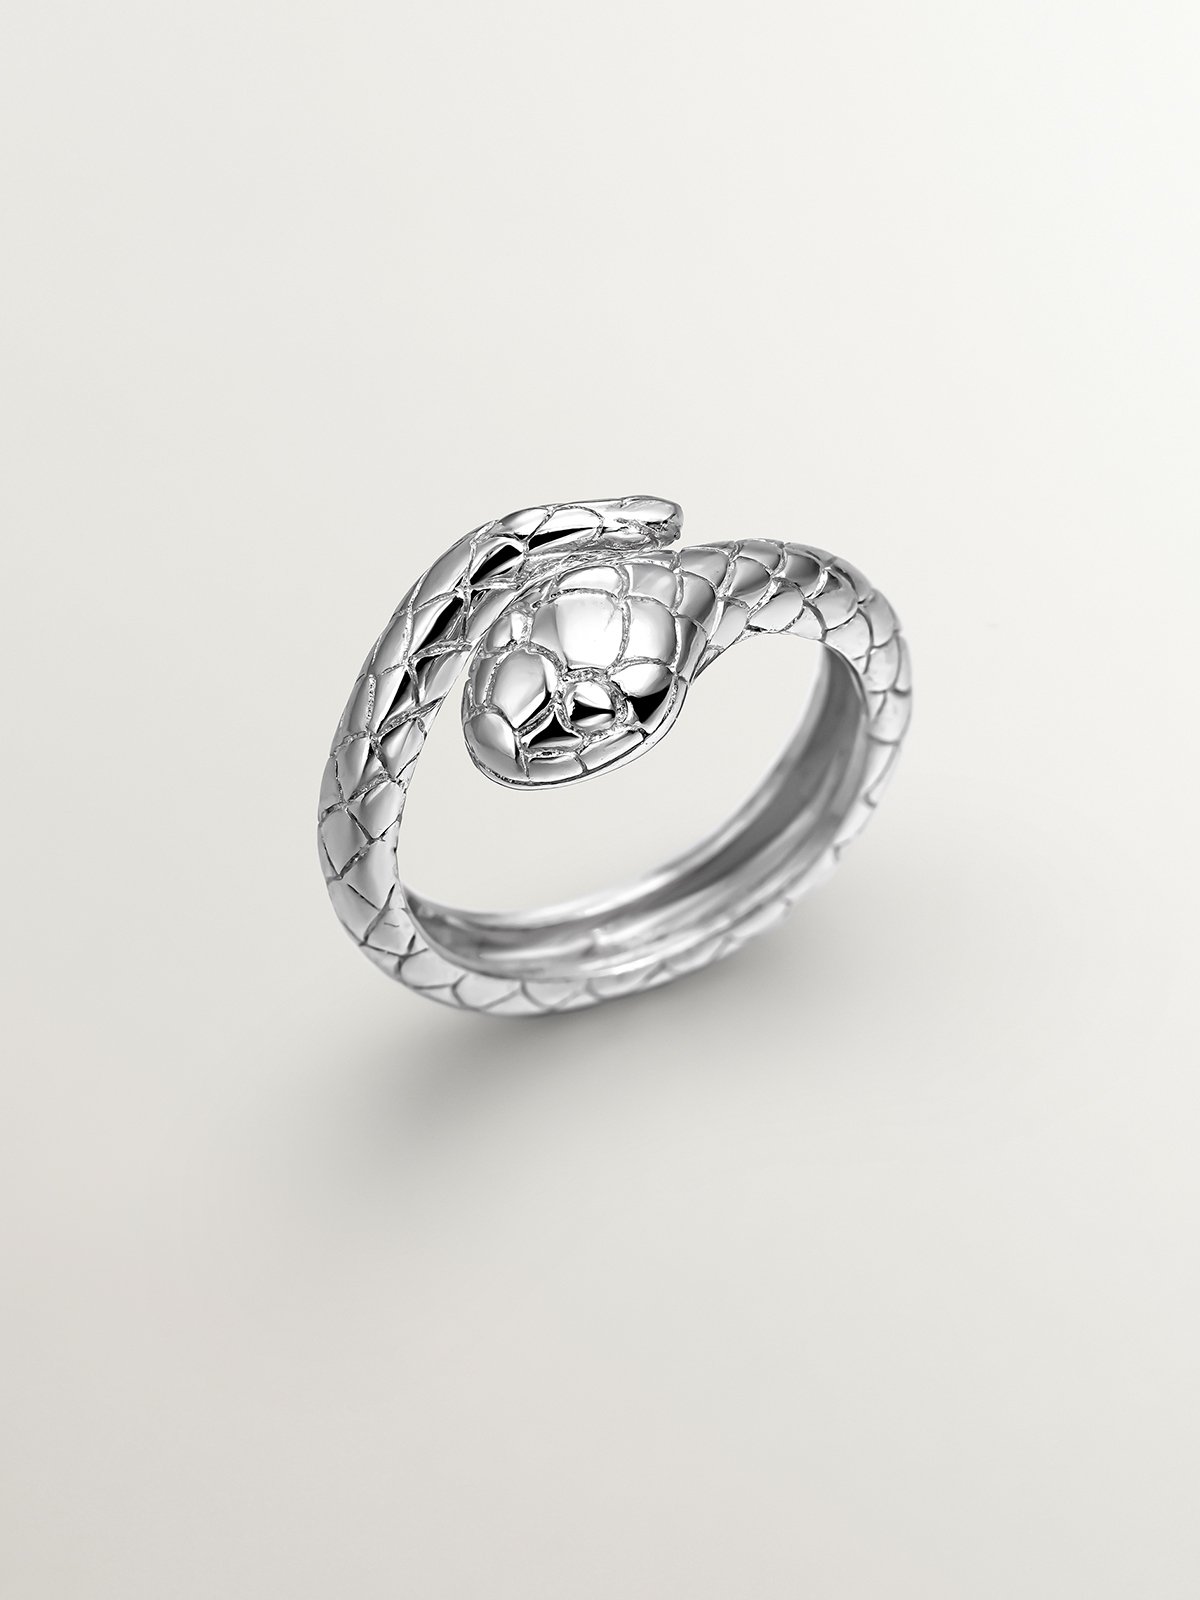 925 Silver Ring with Snake Design